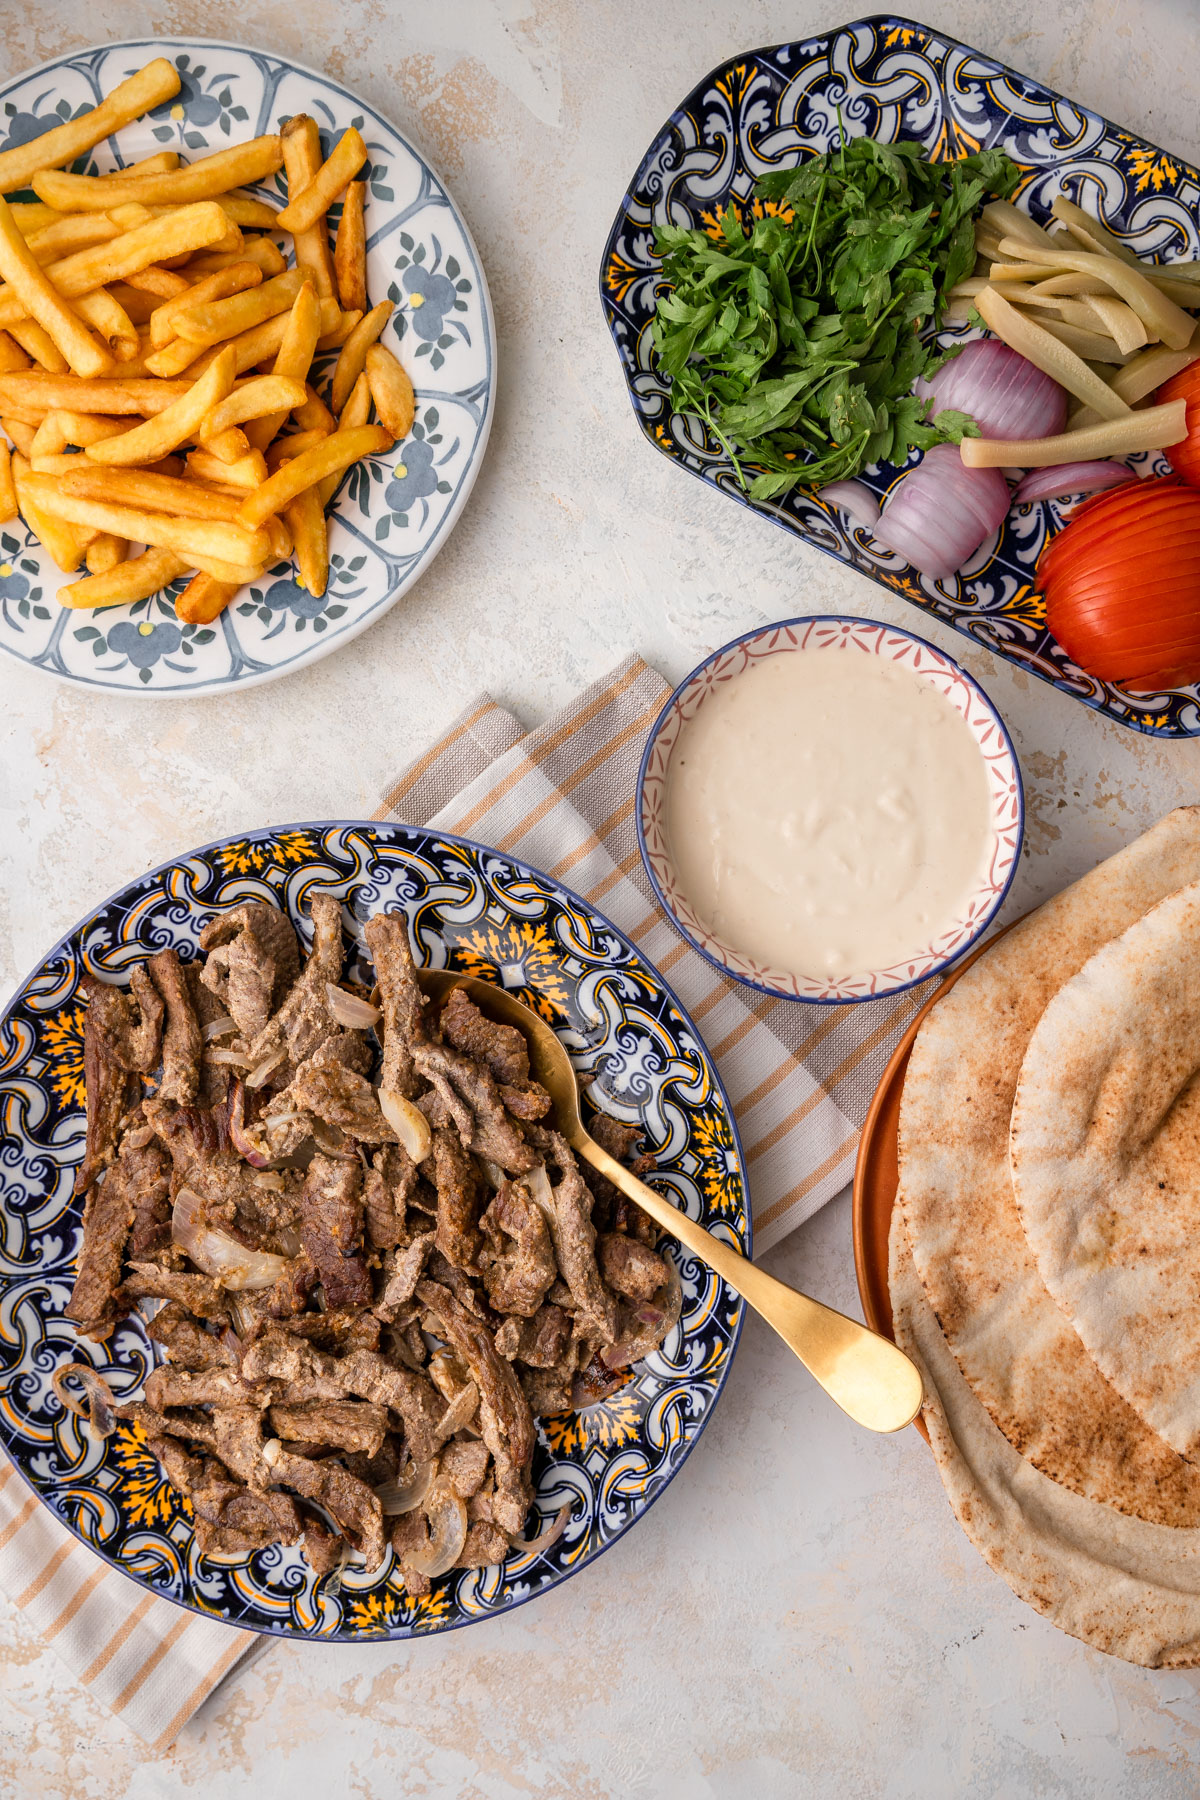 Beef shawarma on a plate with other plates of fries, tahini, vegetables.